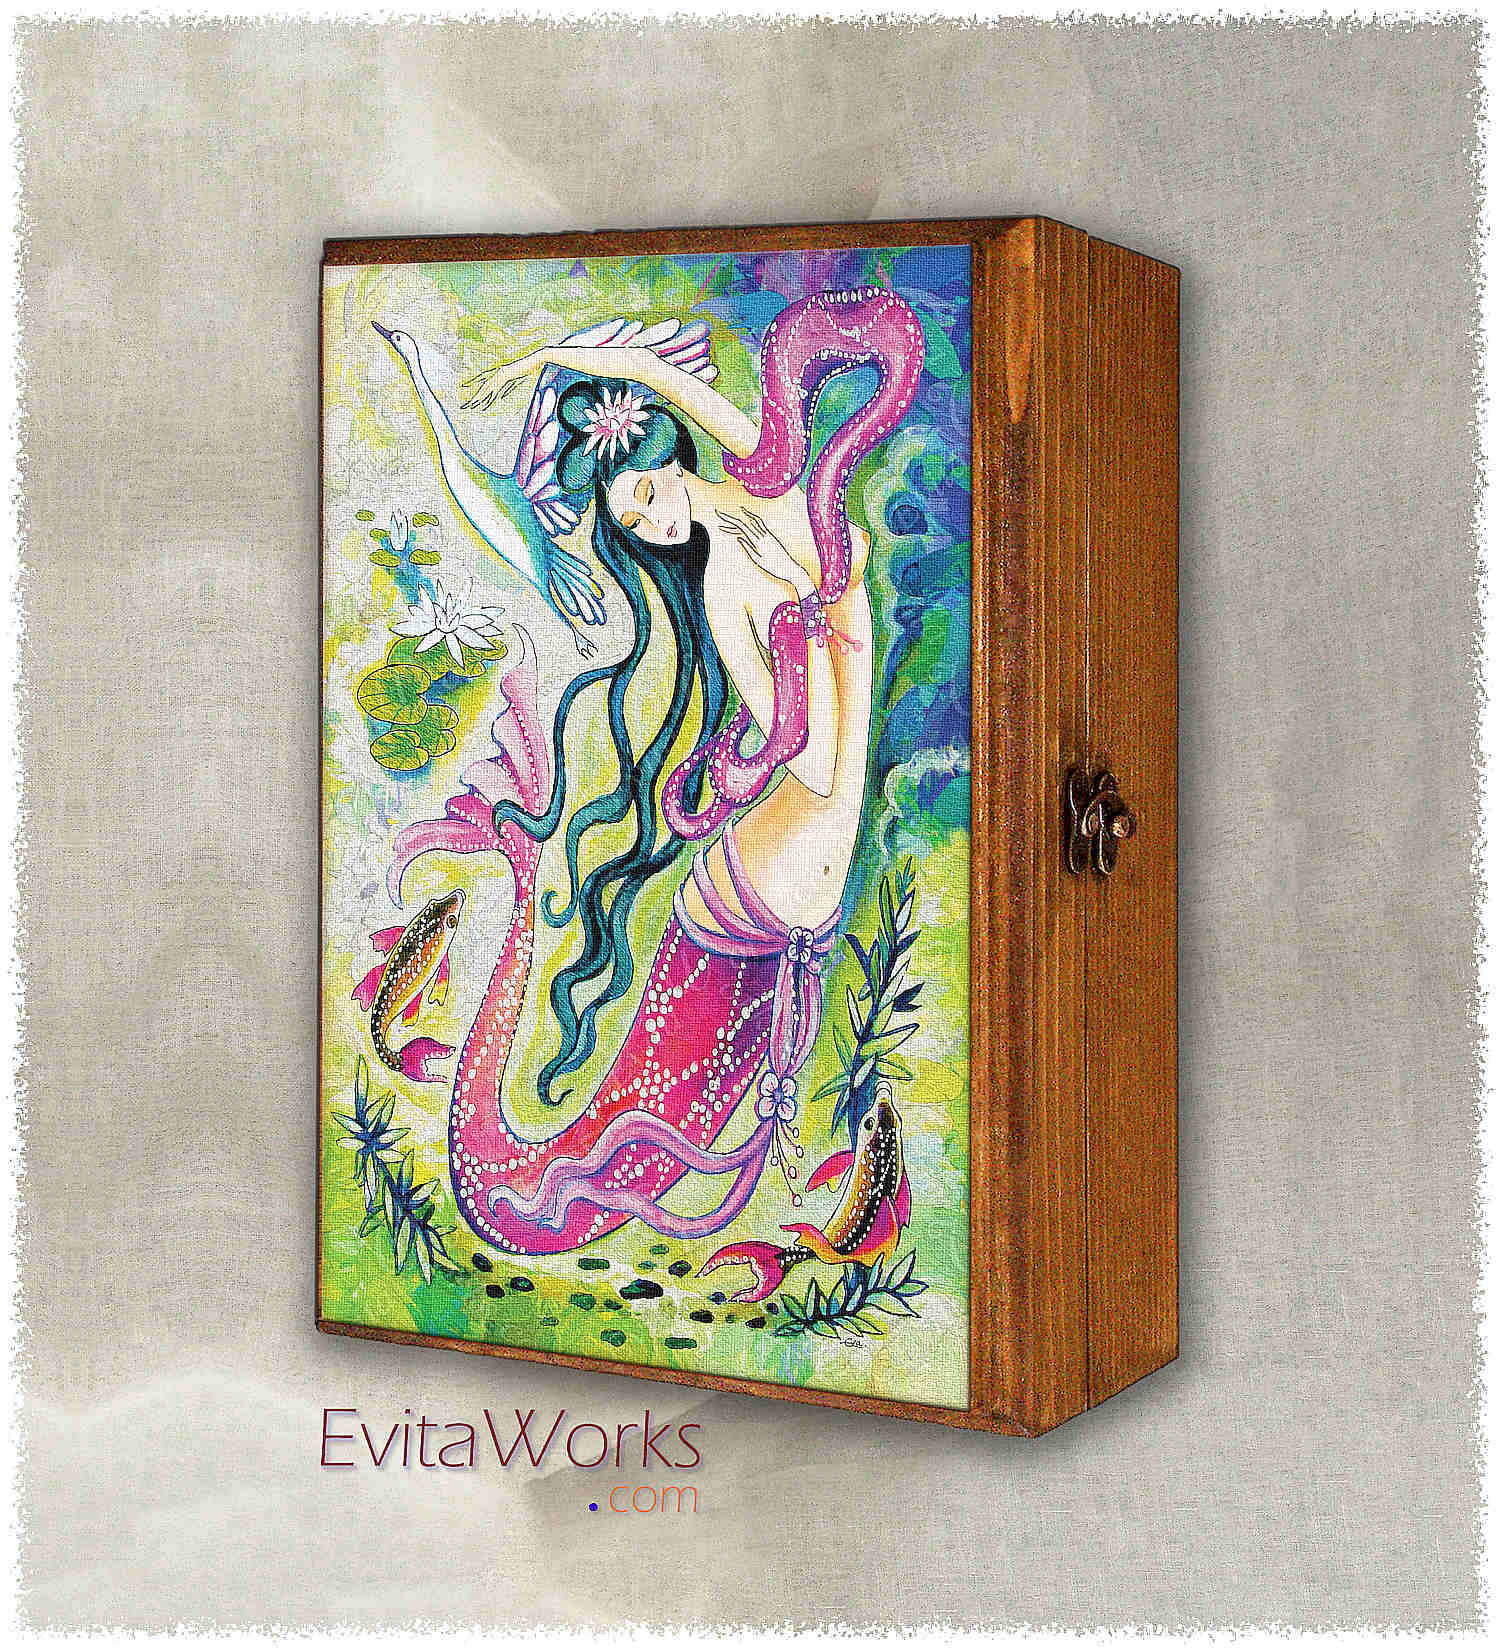 Hit to learn about "Koi Fish Mermaid, beautiful female creature" on jewelboxes